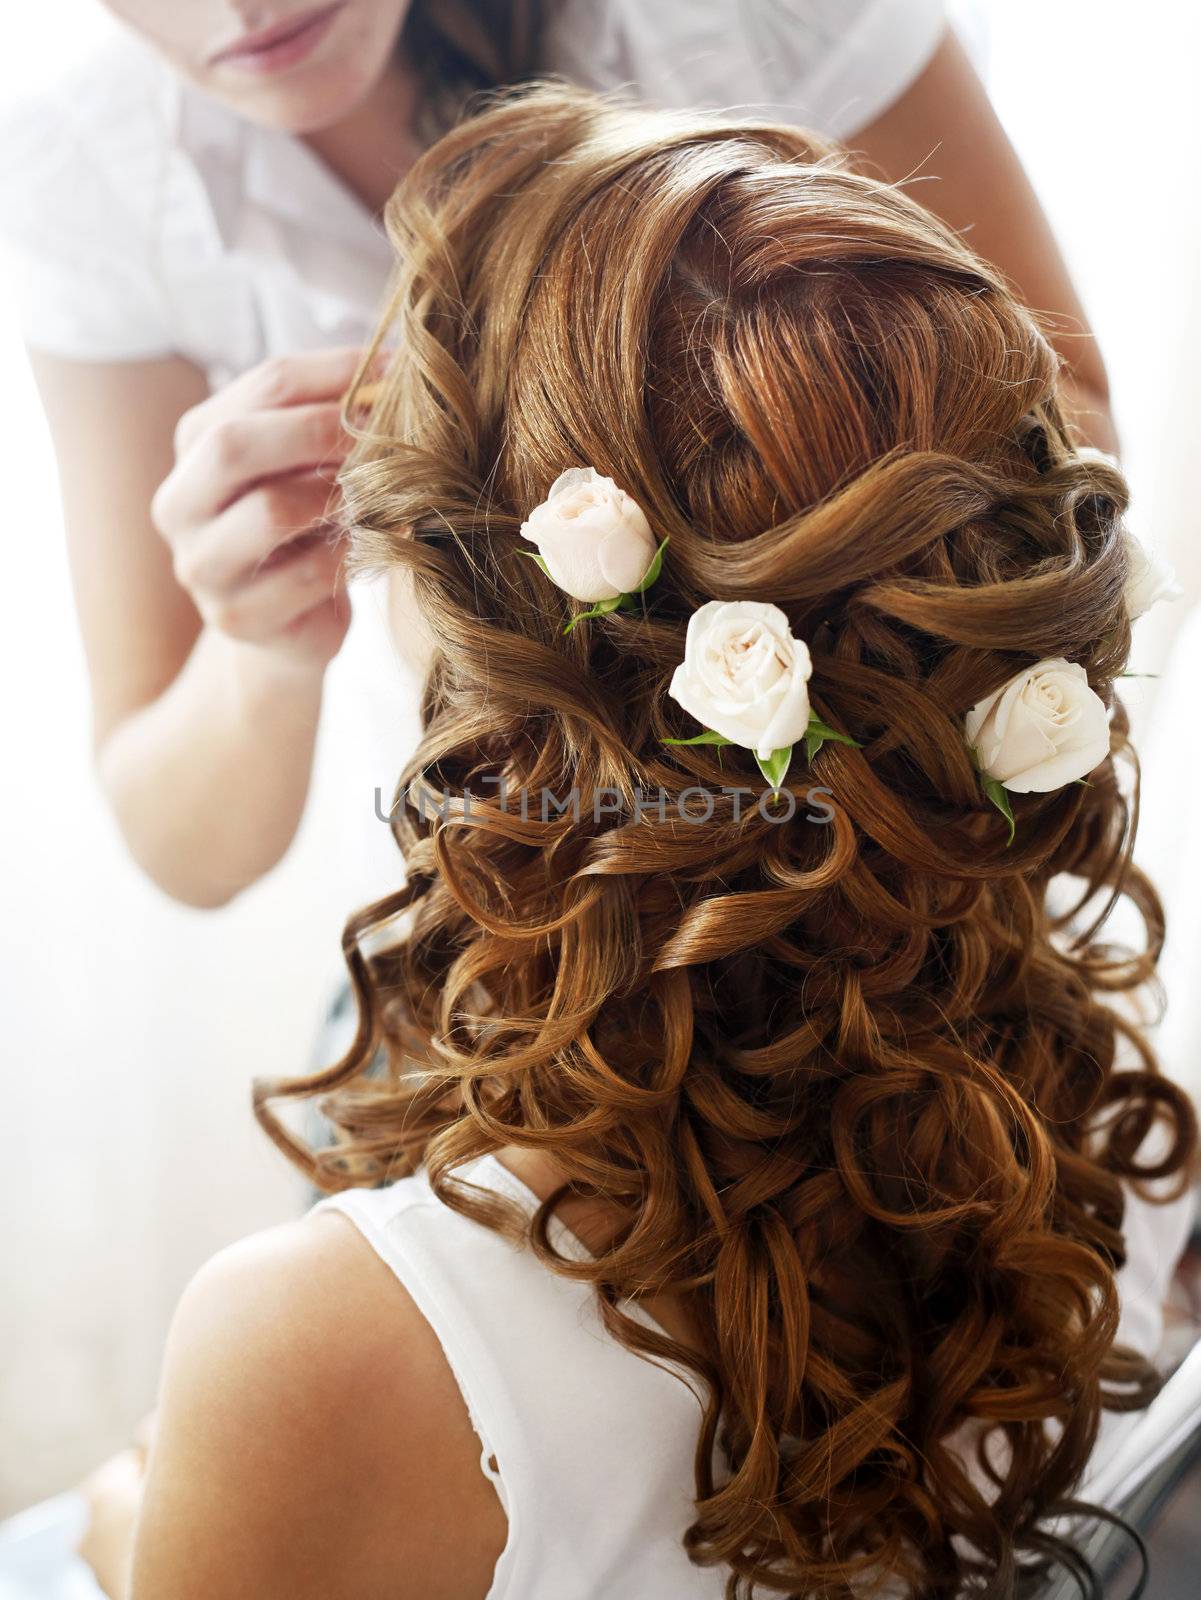 Hairdress of the bride decorated with flowers